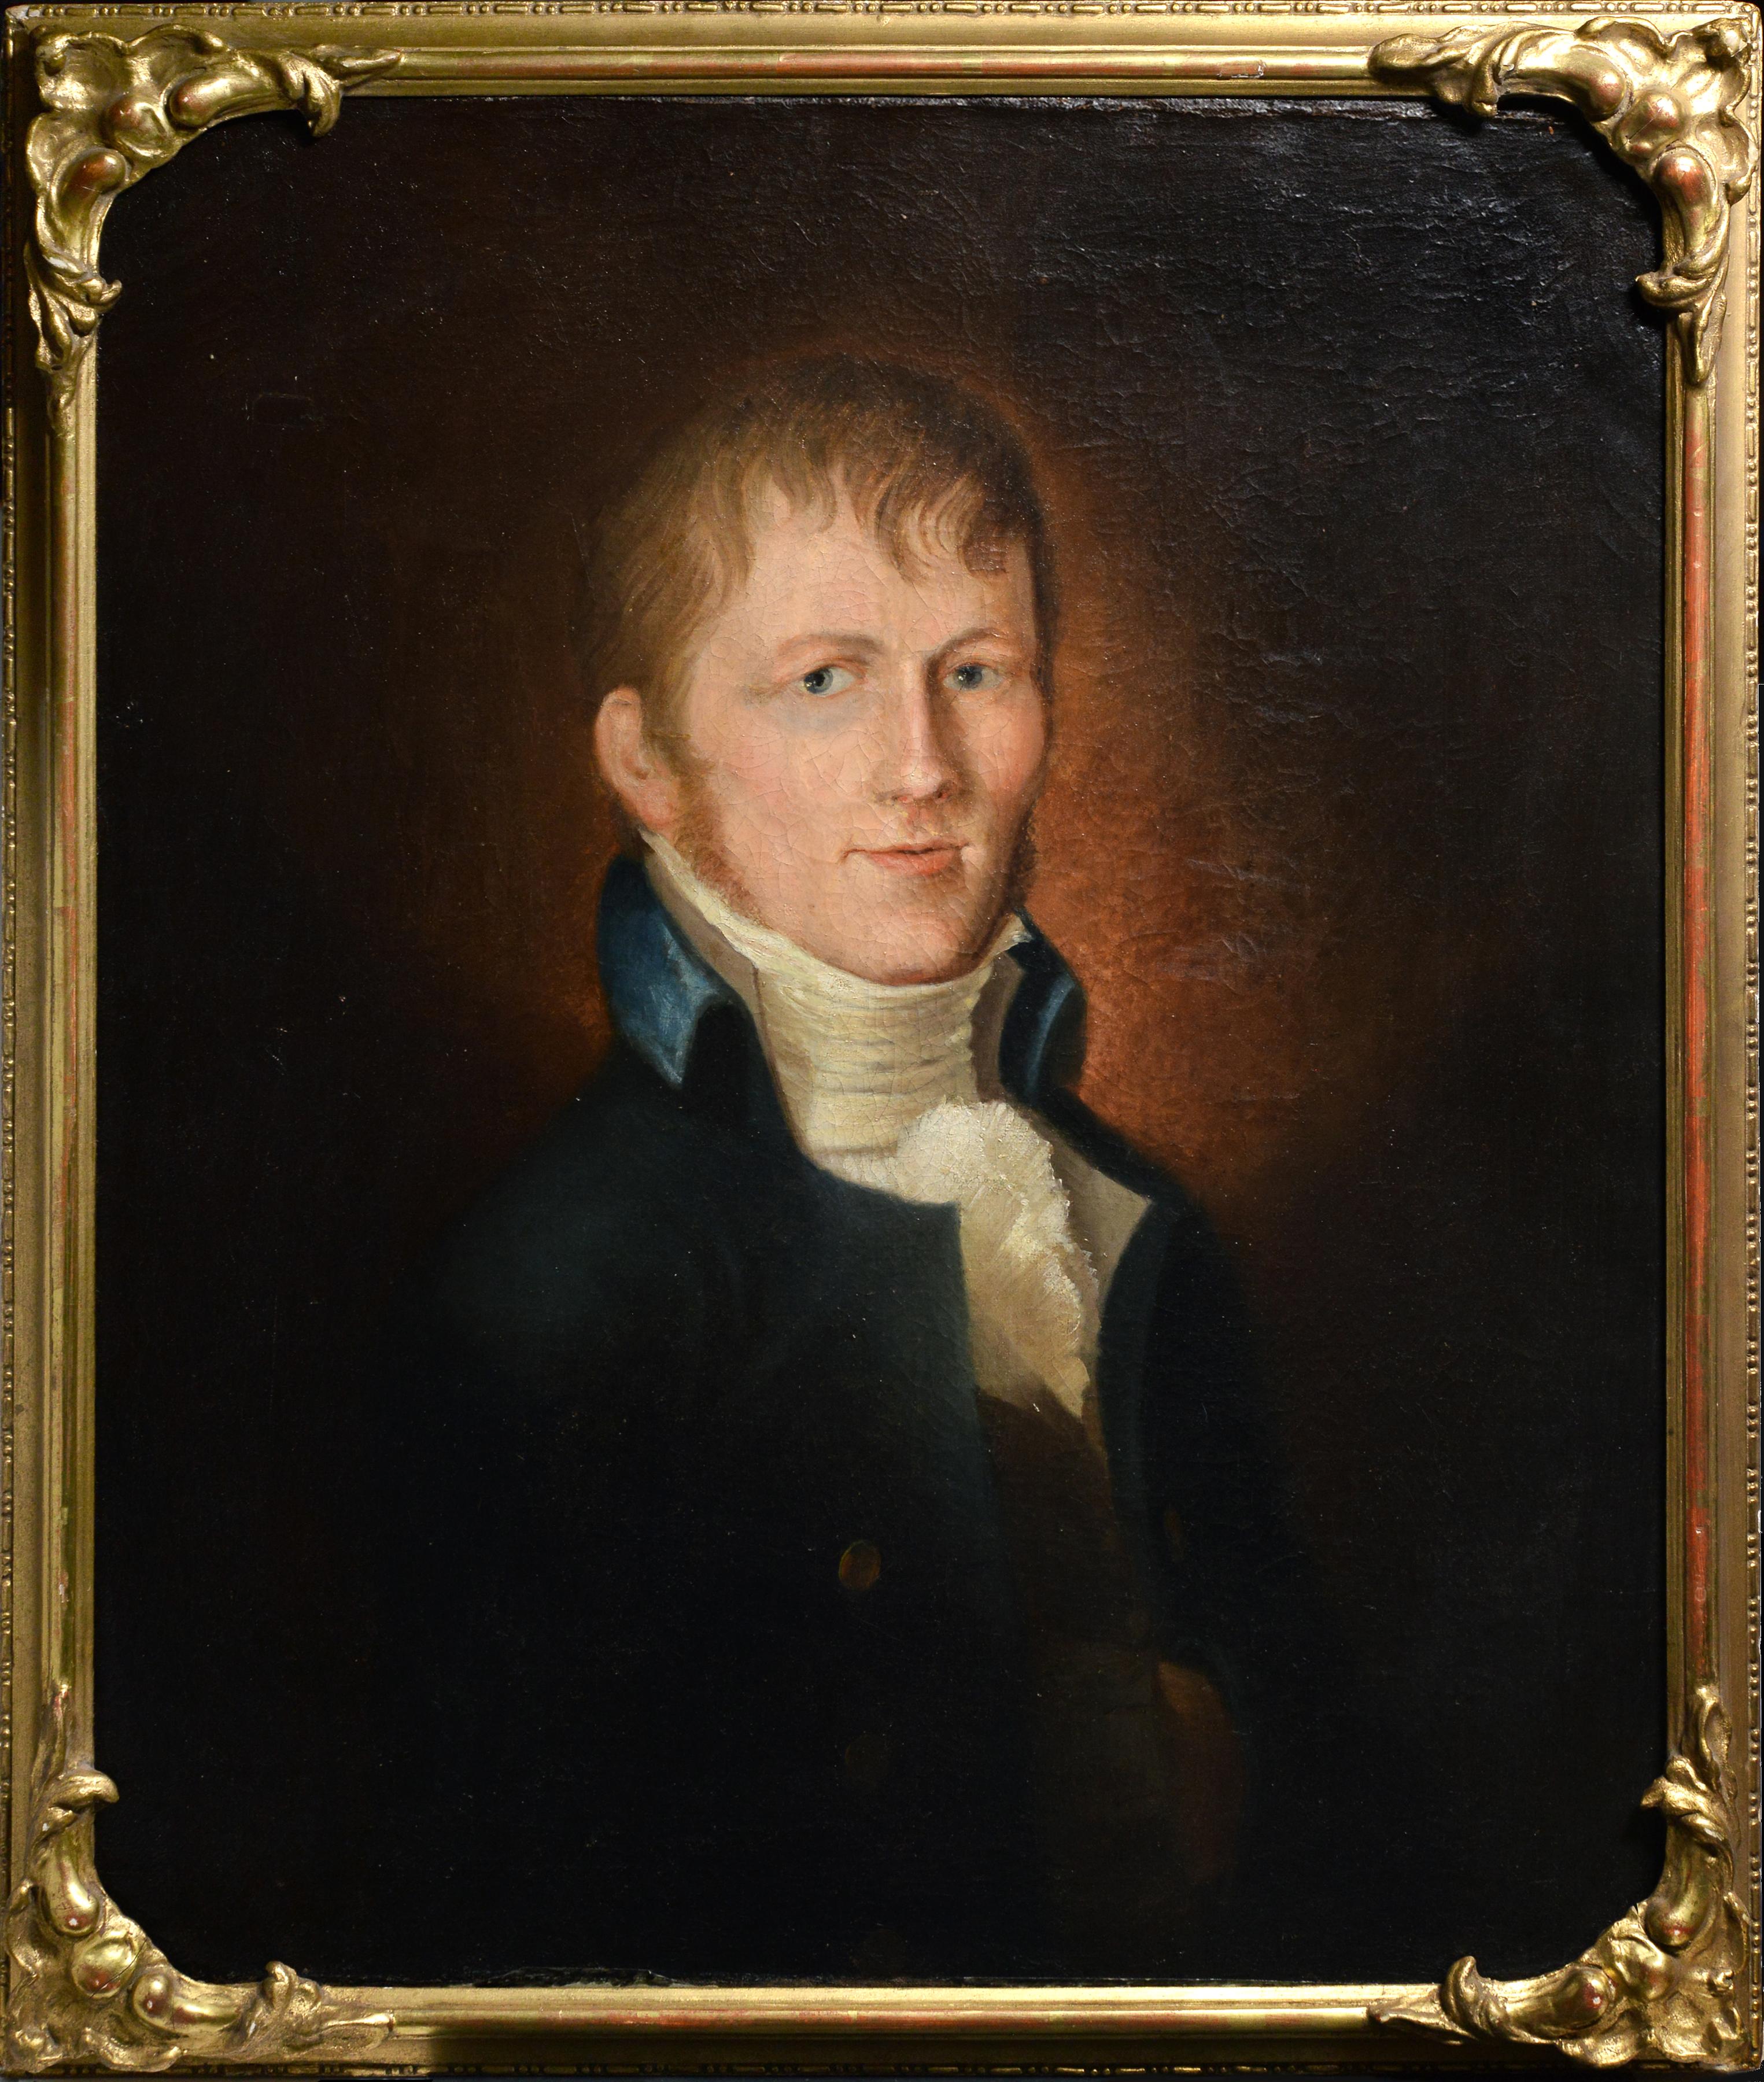 Samuel Finley Breese Morse Portrait Painting - Young Gentleman Portrait by American Samuel Morse inventor of Telegraph Code 19C